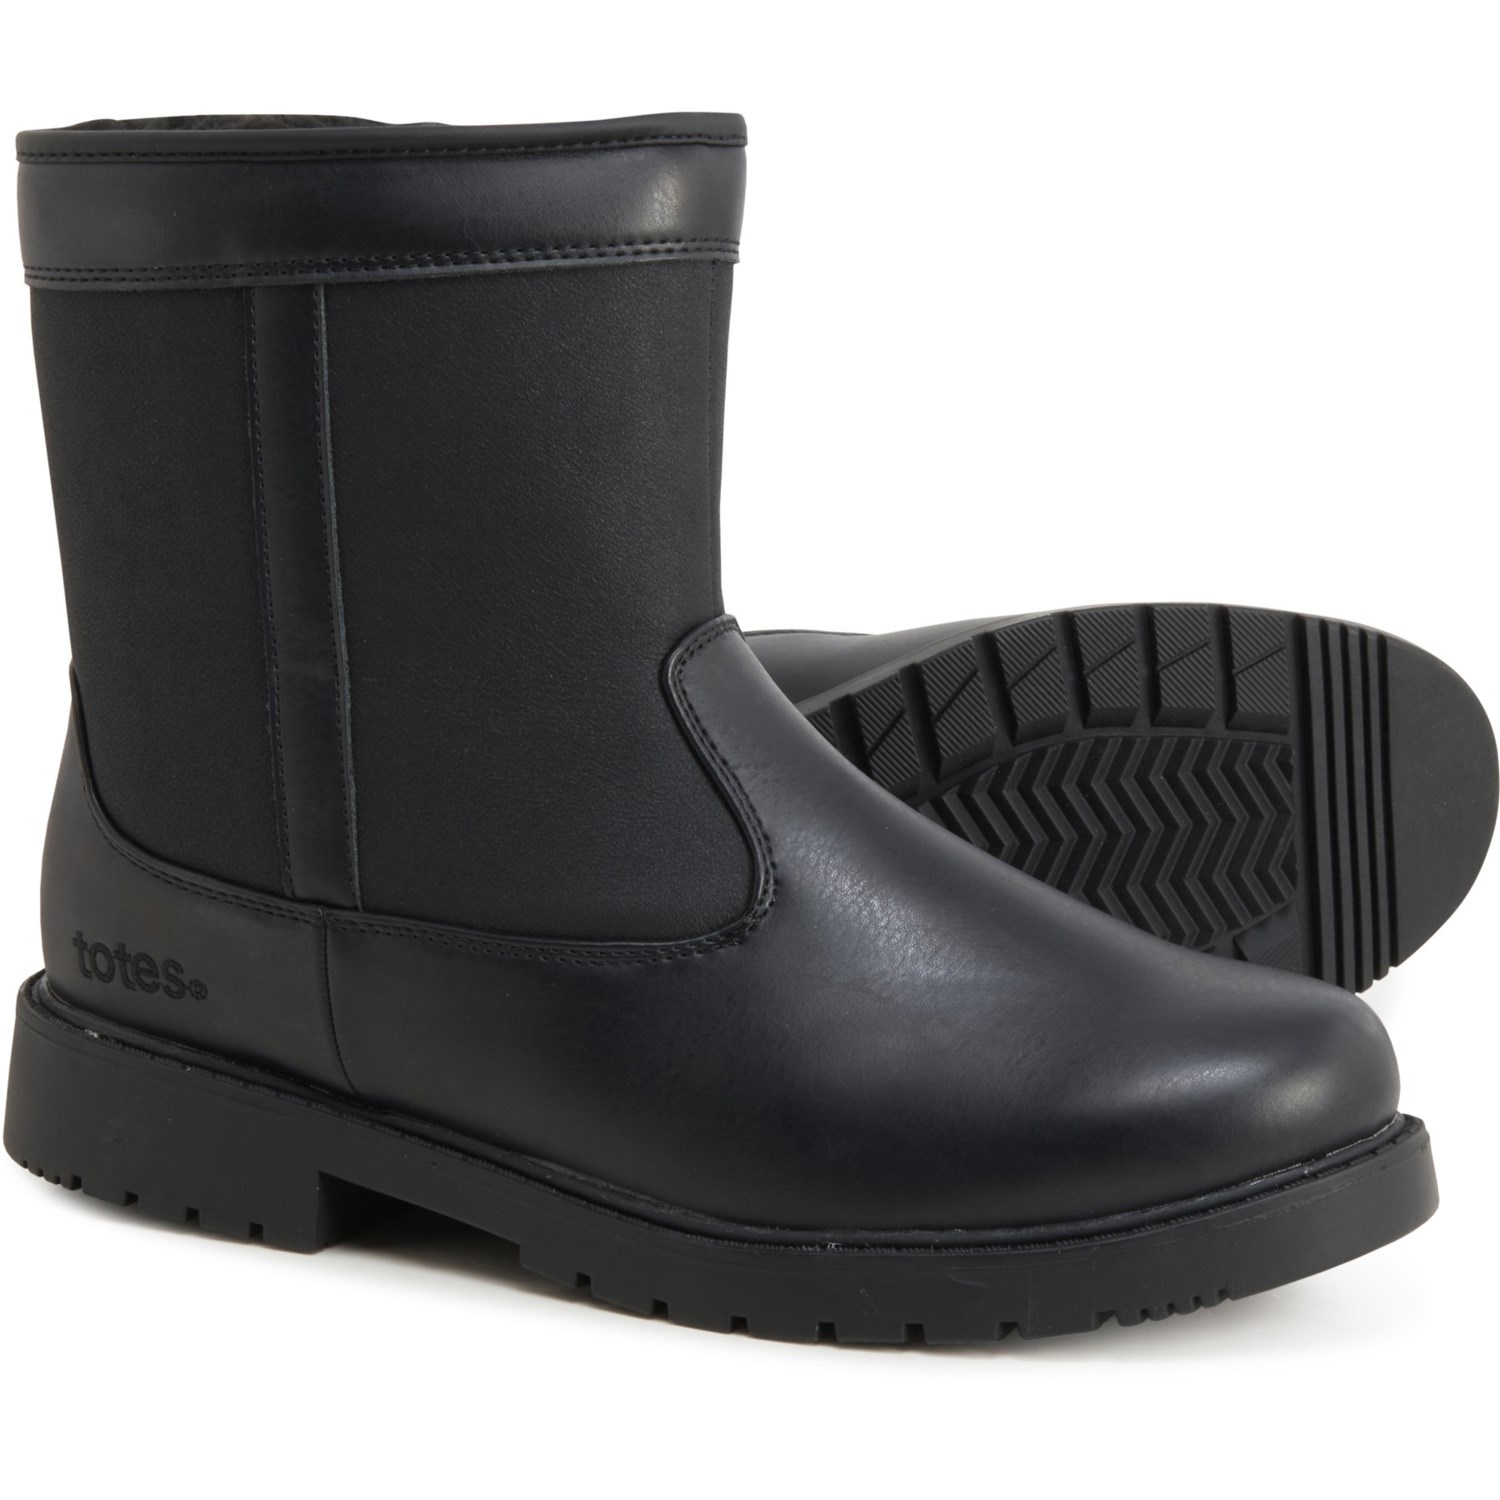 totes Stadium Snow Boots (For Men) - Save 55%